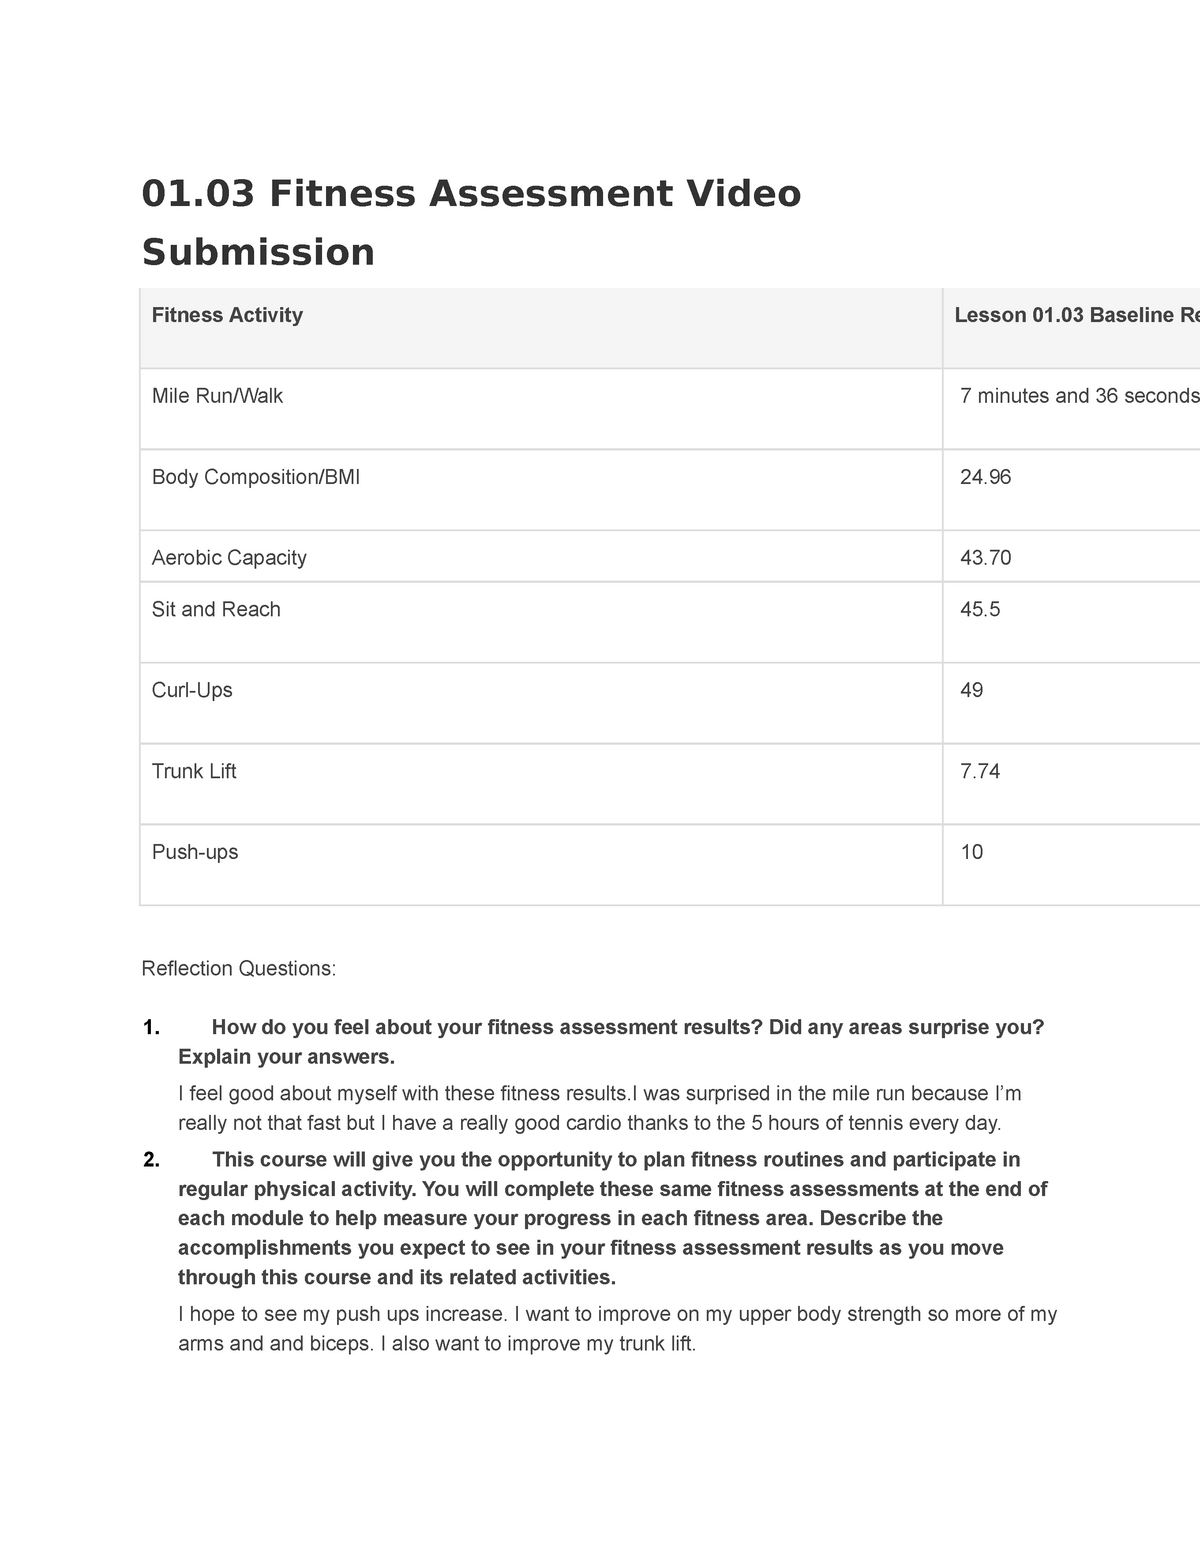 assignment 01.03 fitness assessment video submission